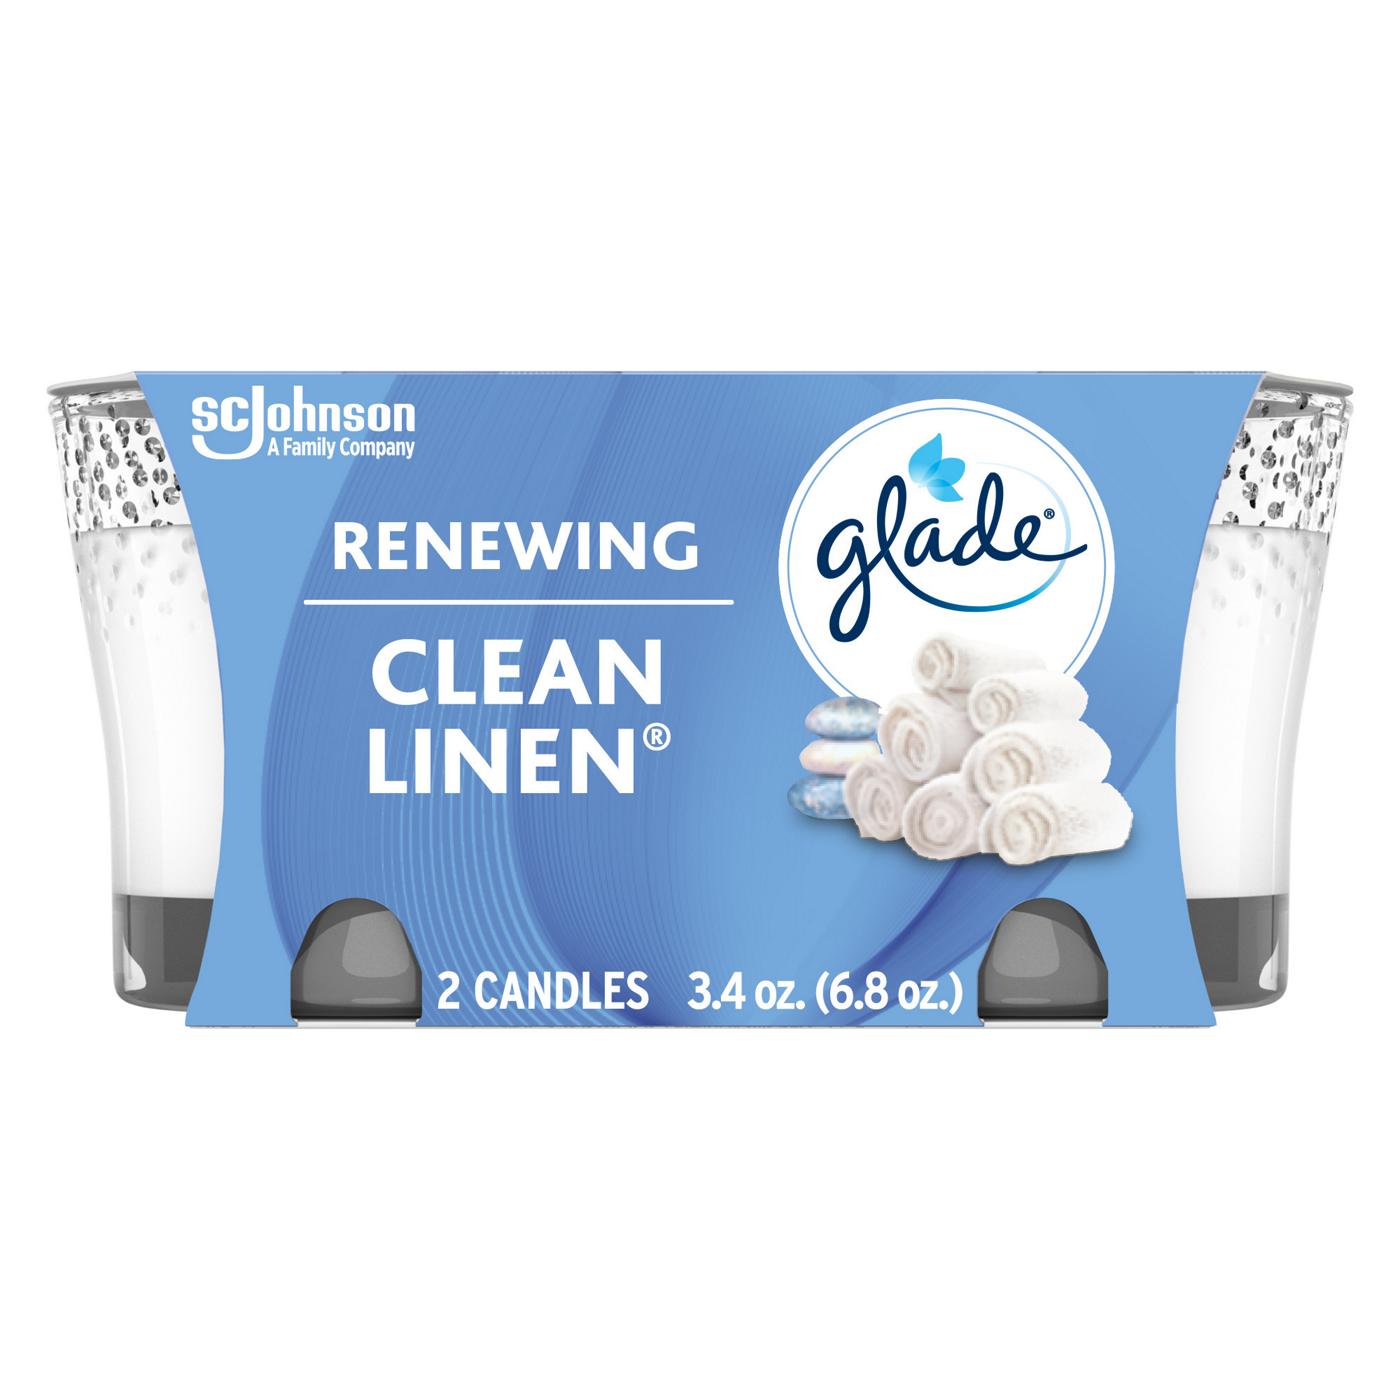 Glade Clean Linen Candles Value Pack; image 1 of 2